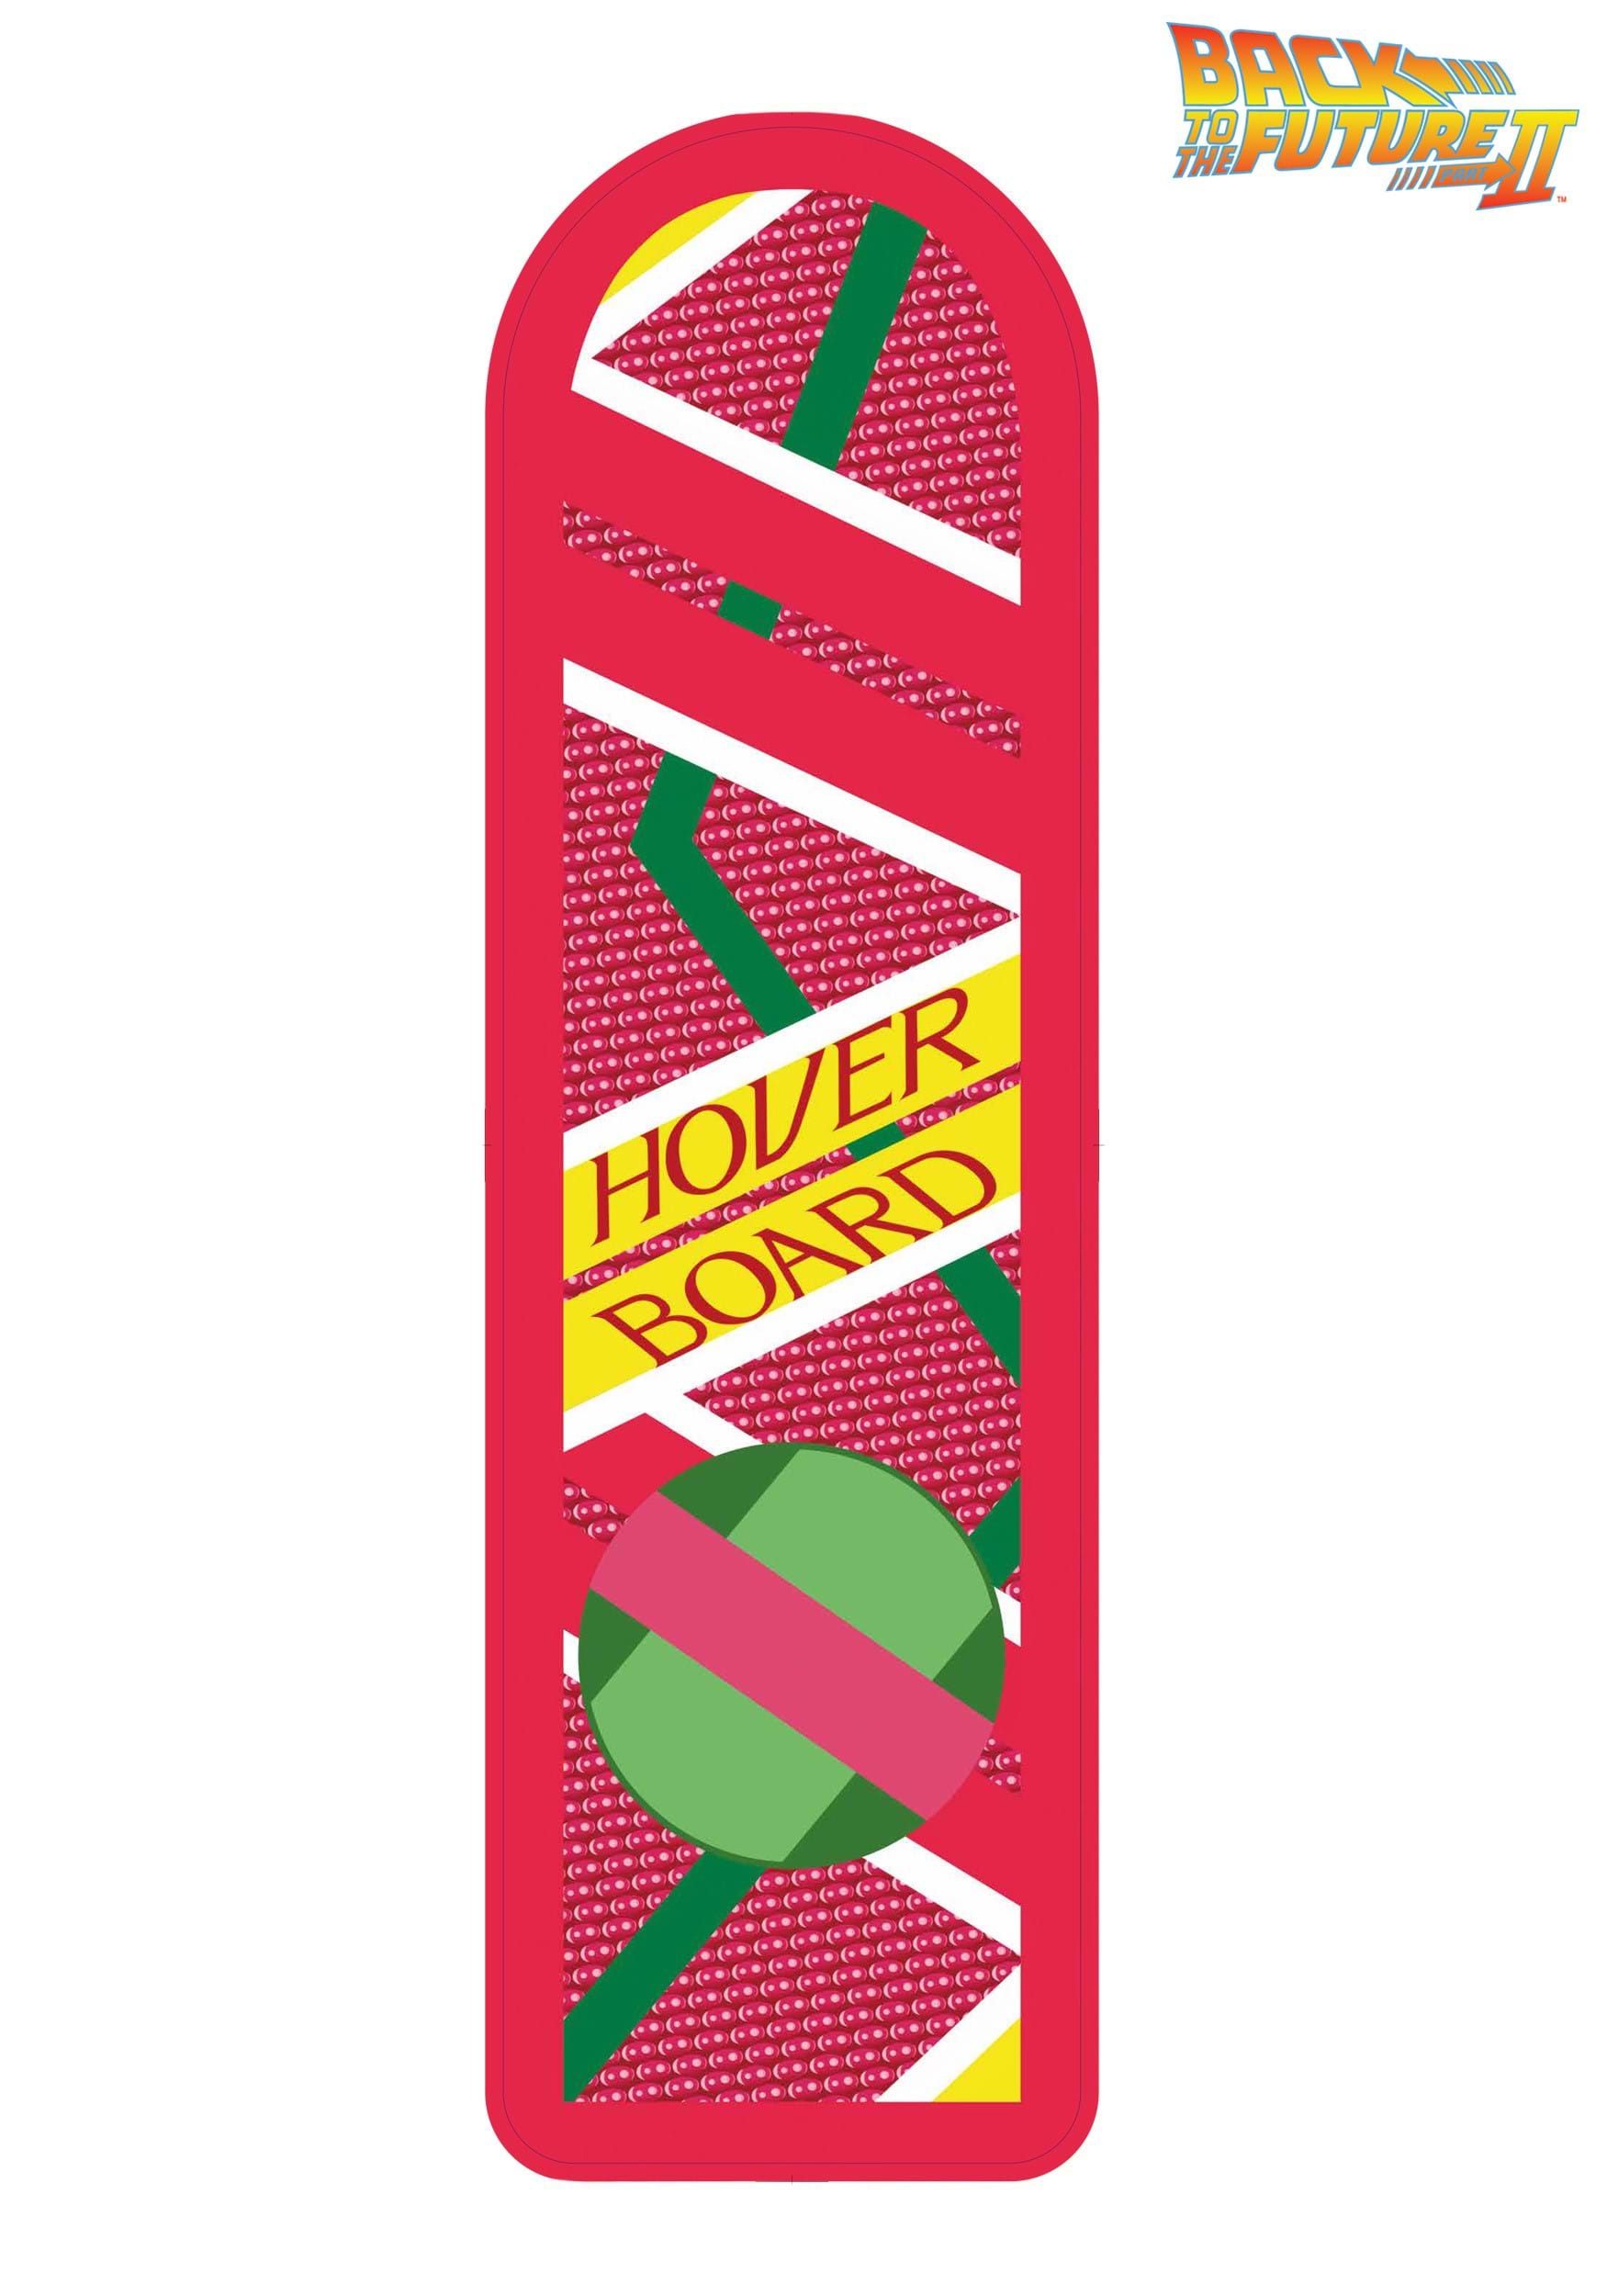 Back To The Future Hoverboard Prop Accessory